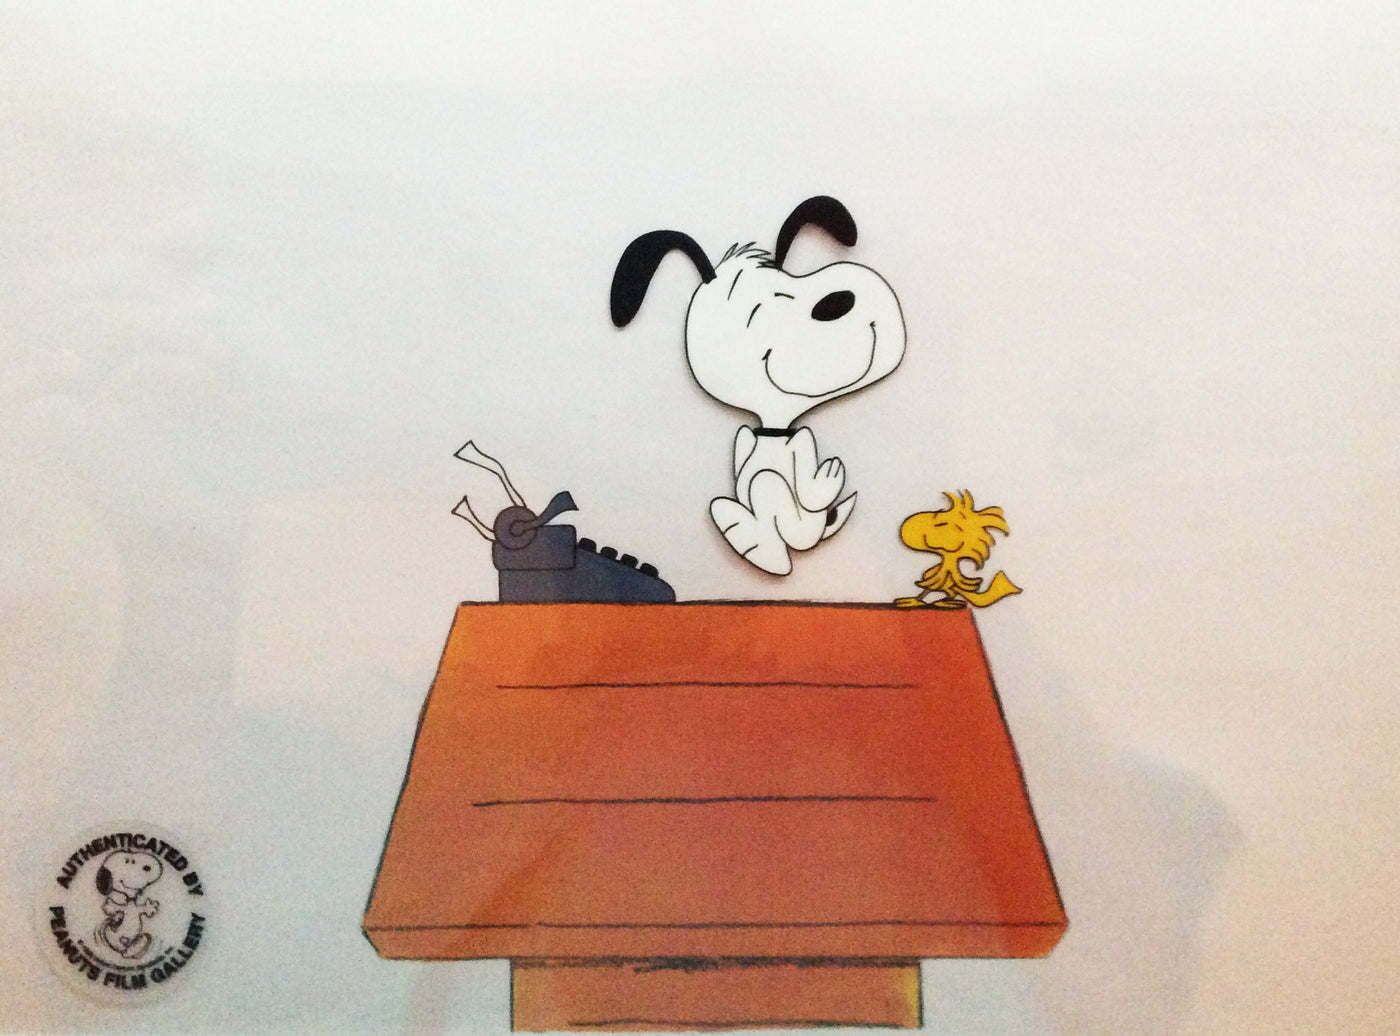 Original Peanuts Production Cel with Two Matching Production Drawings from Snoopy!!! The Musical (TV special)